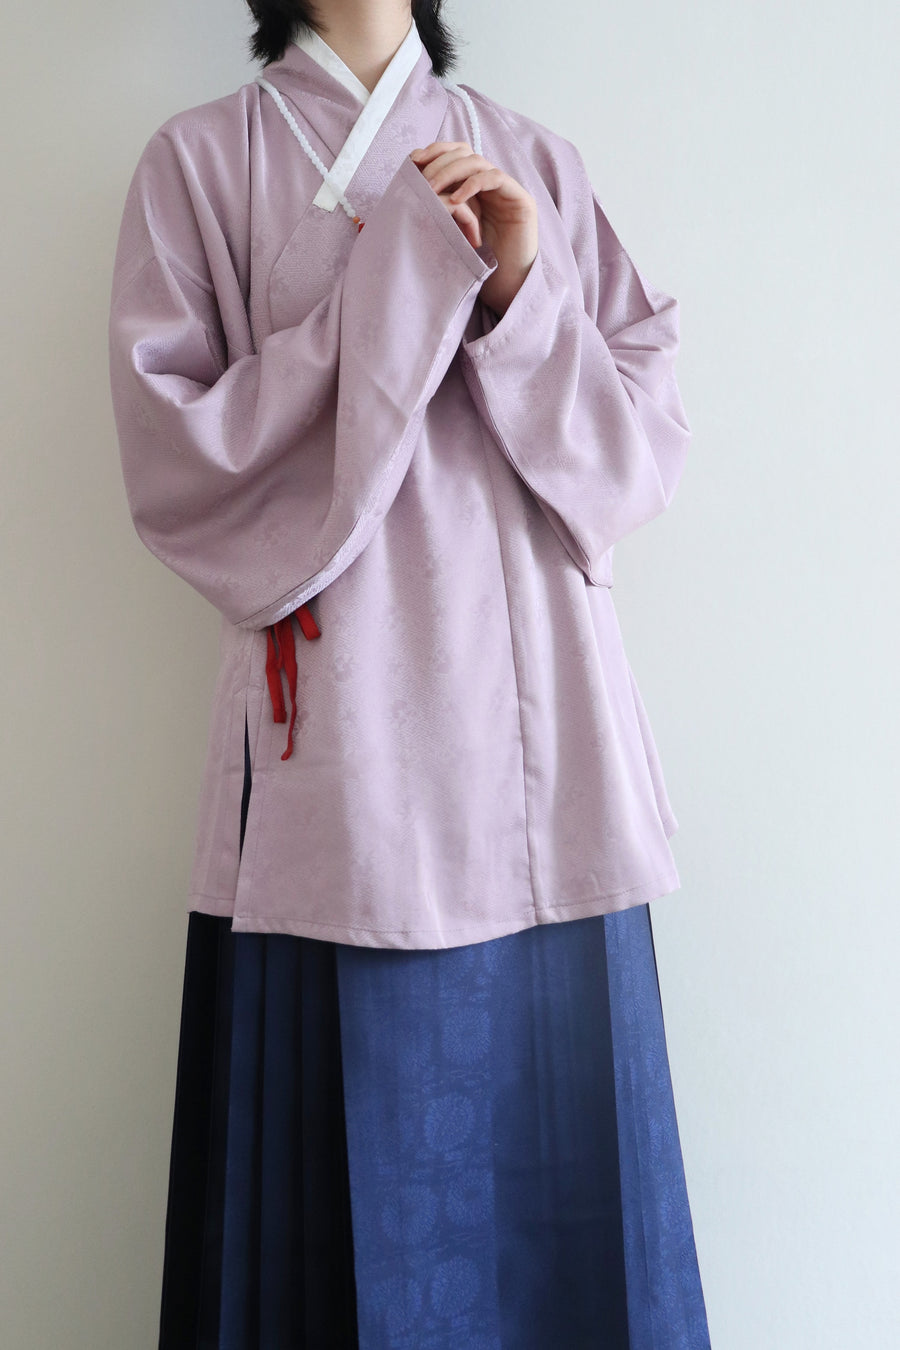 Pipa 琵琶 Lute Sleeve Middle Ming Dynasty Cross Collar Shirt